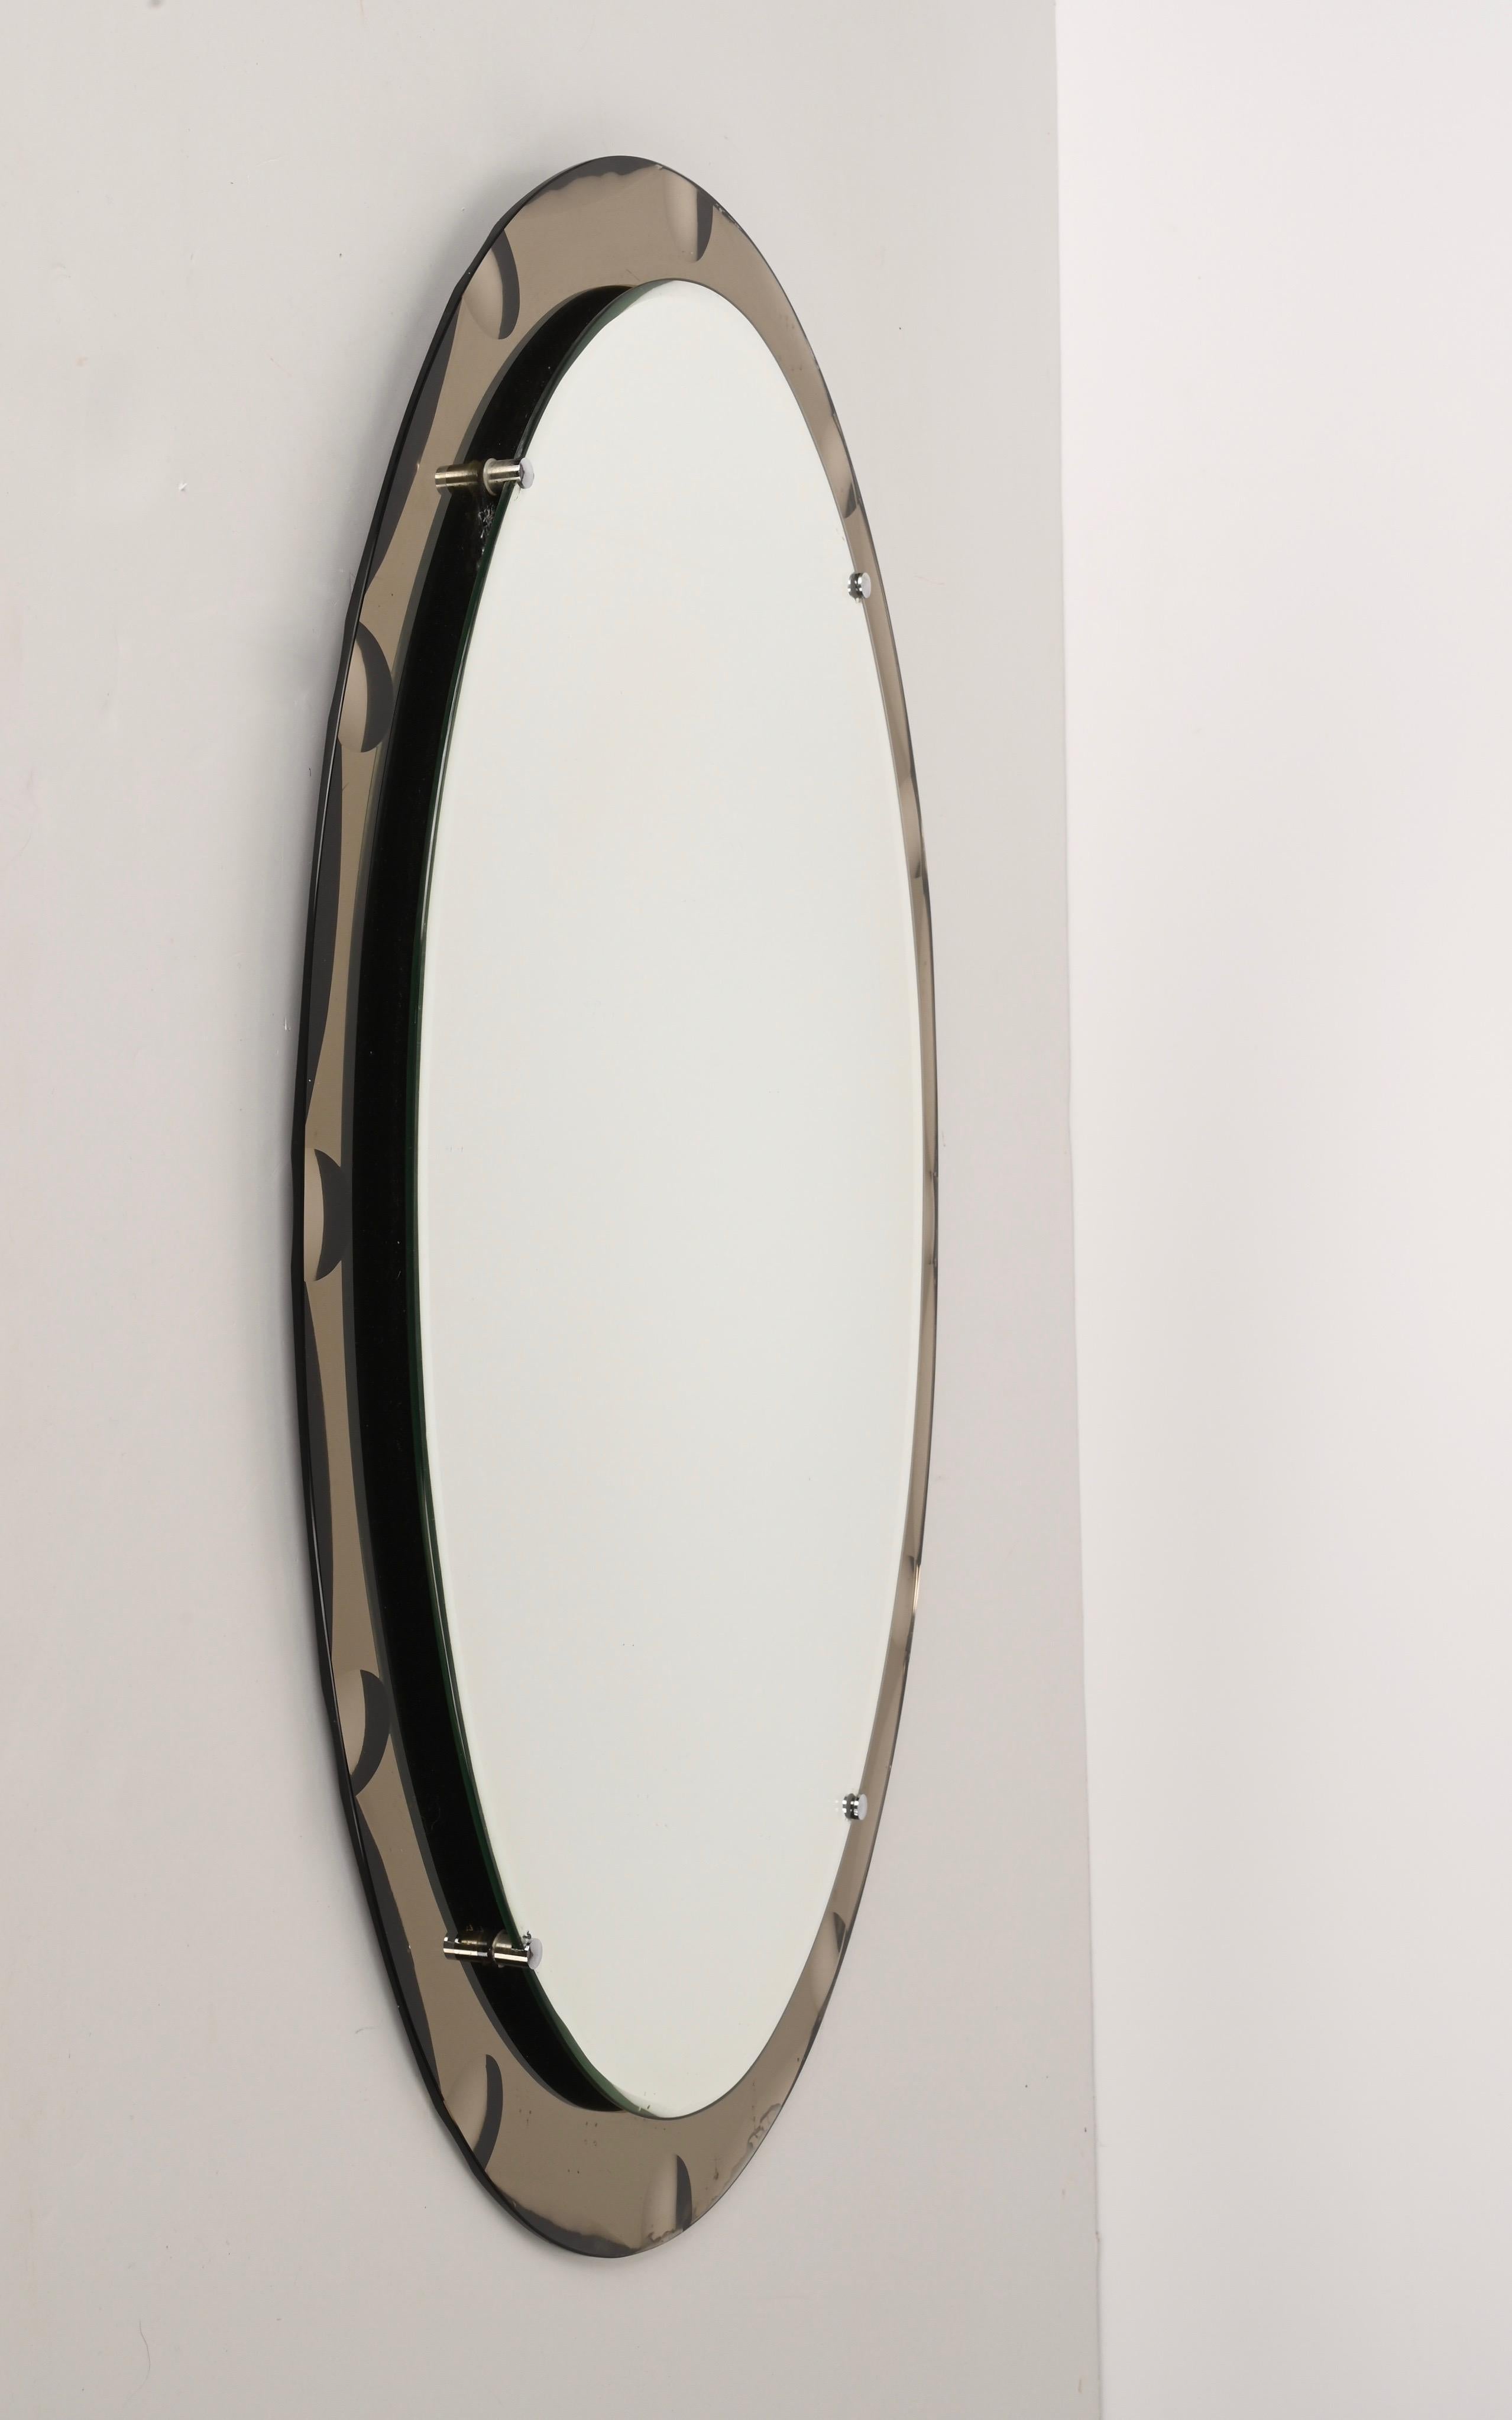 Amazing mid-century oval mirror with bronzed graven frame. This mirror was designed in Italy in the style of Cristal Arte during the 1960s.

This piece is an example of excellent Italian craftsmanship with a double mirror layer. The external frame